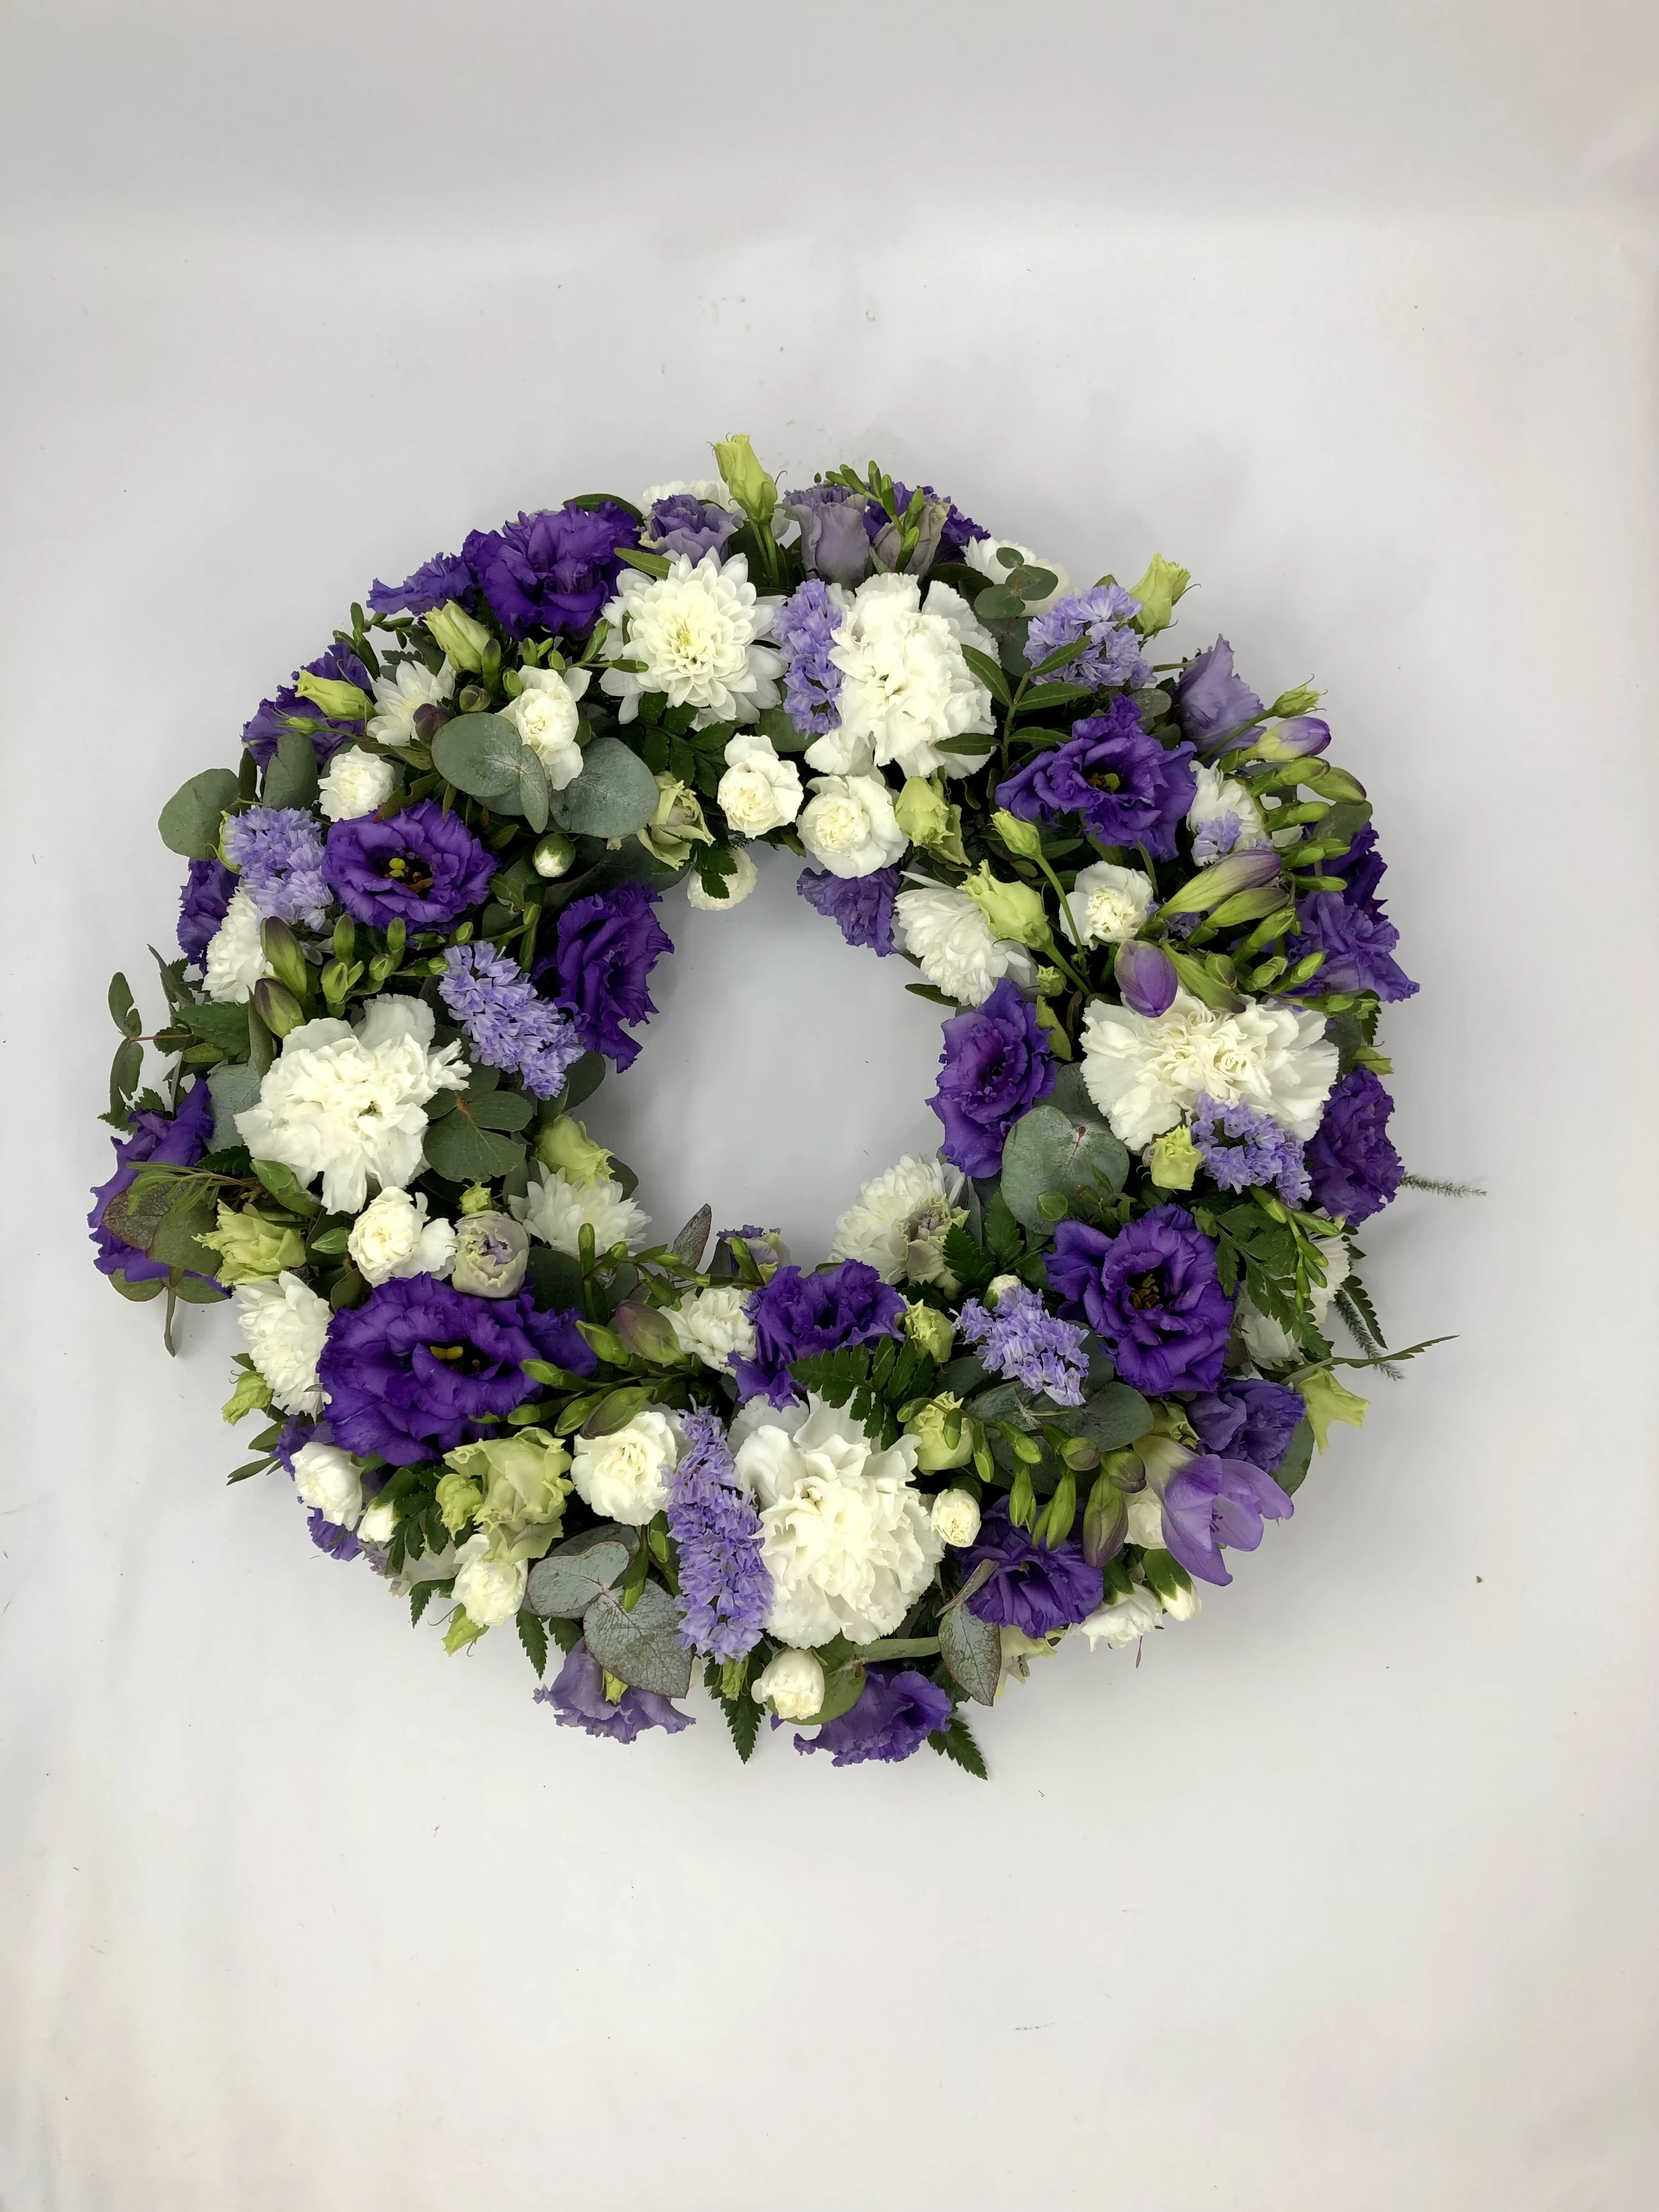 Classic Wreath - Blue and White Large